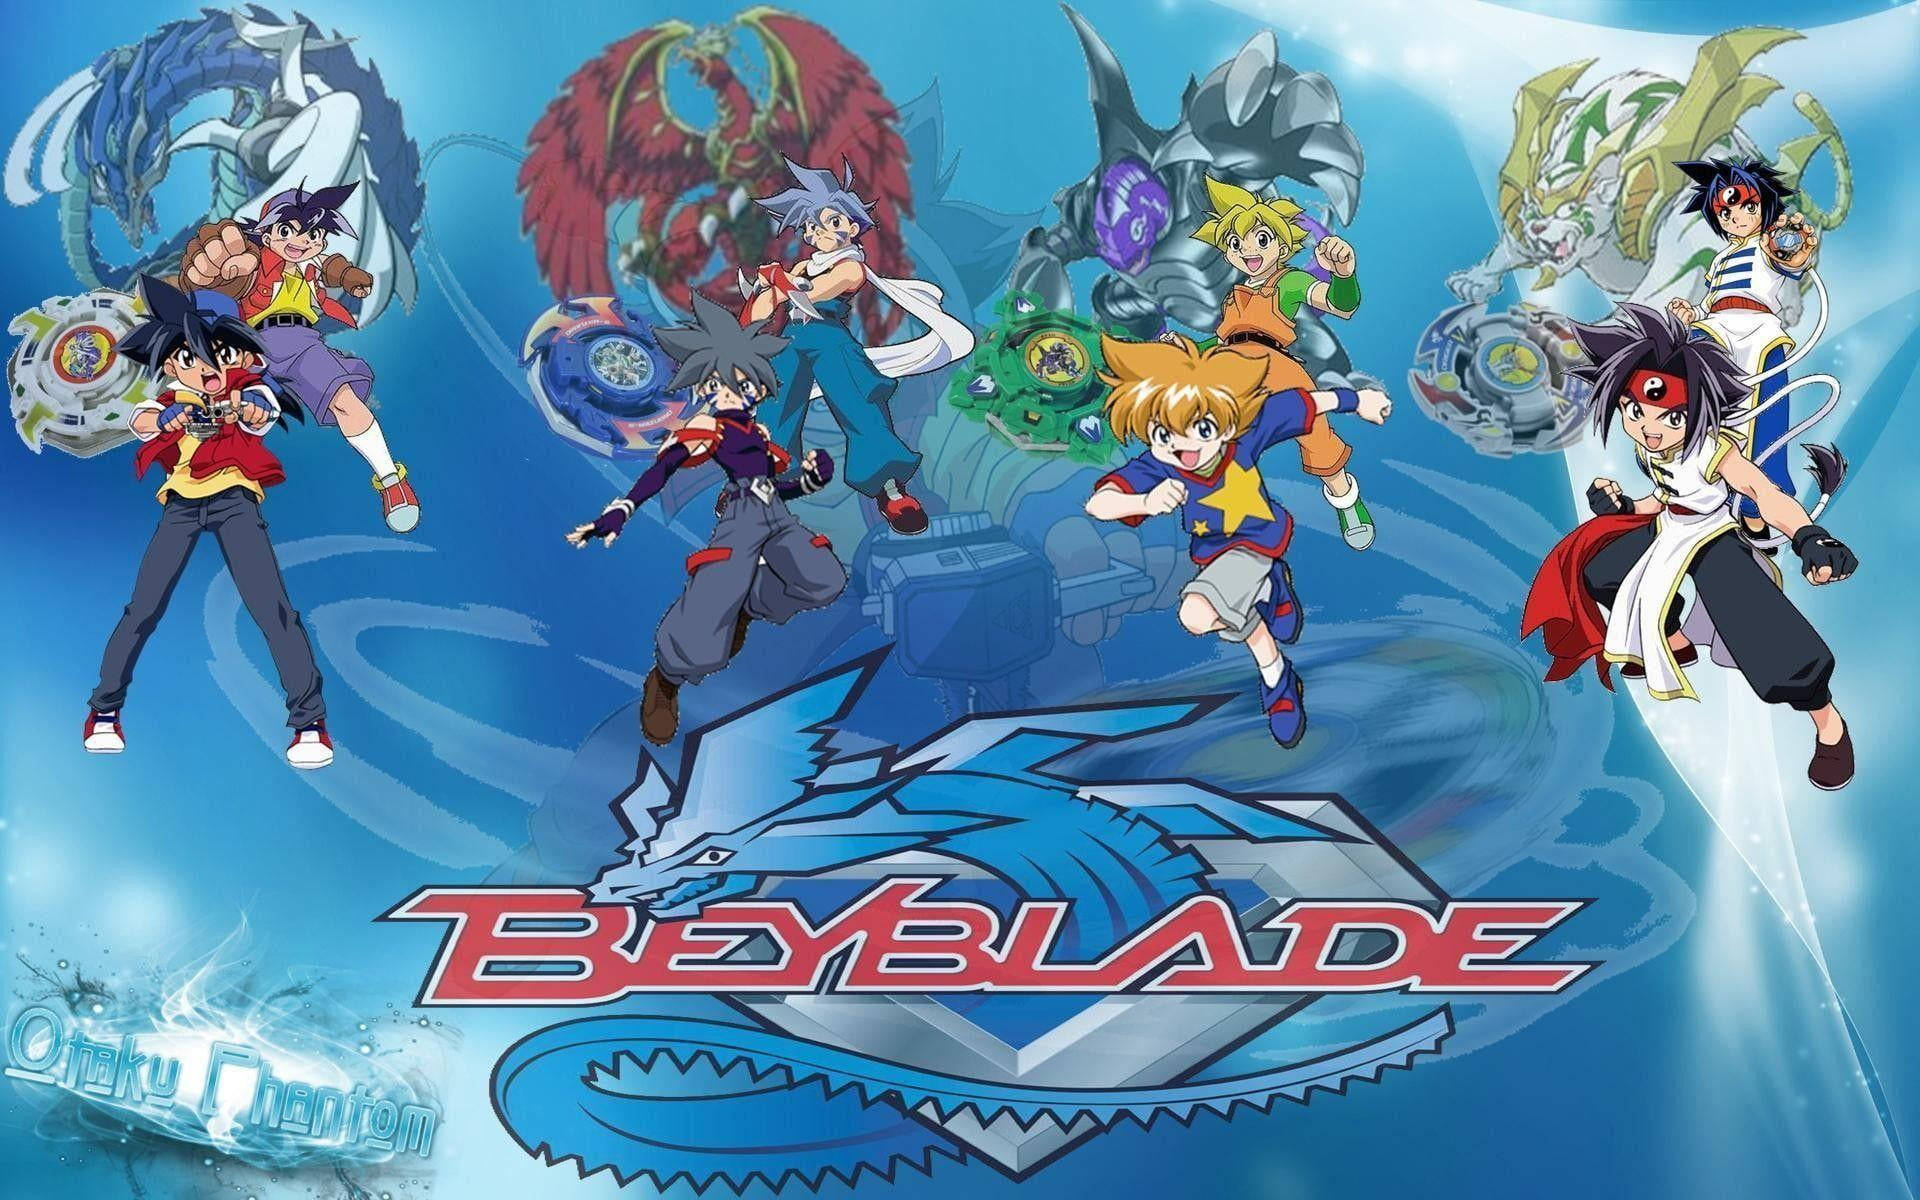 Free Beyblade Wallpaper Downloads, [100+] Beyblade Wallpapers for FREE |  